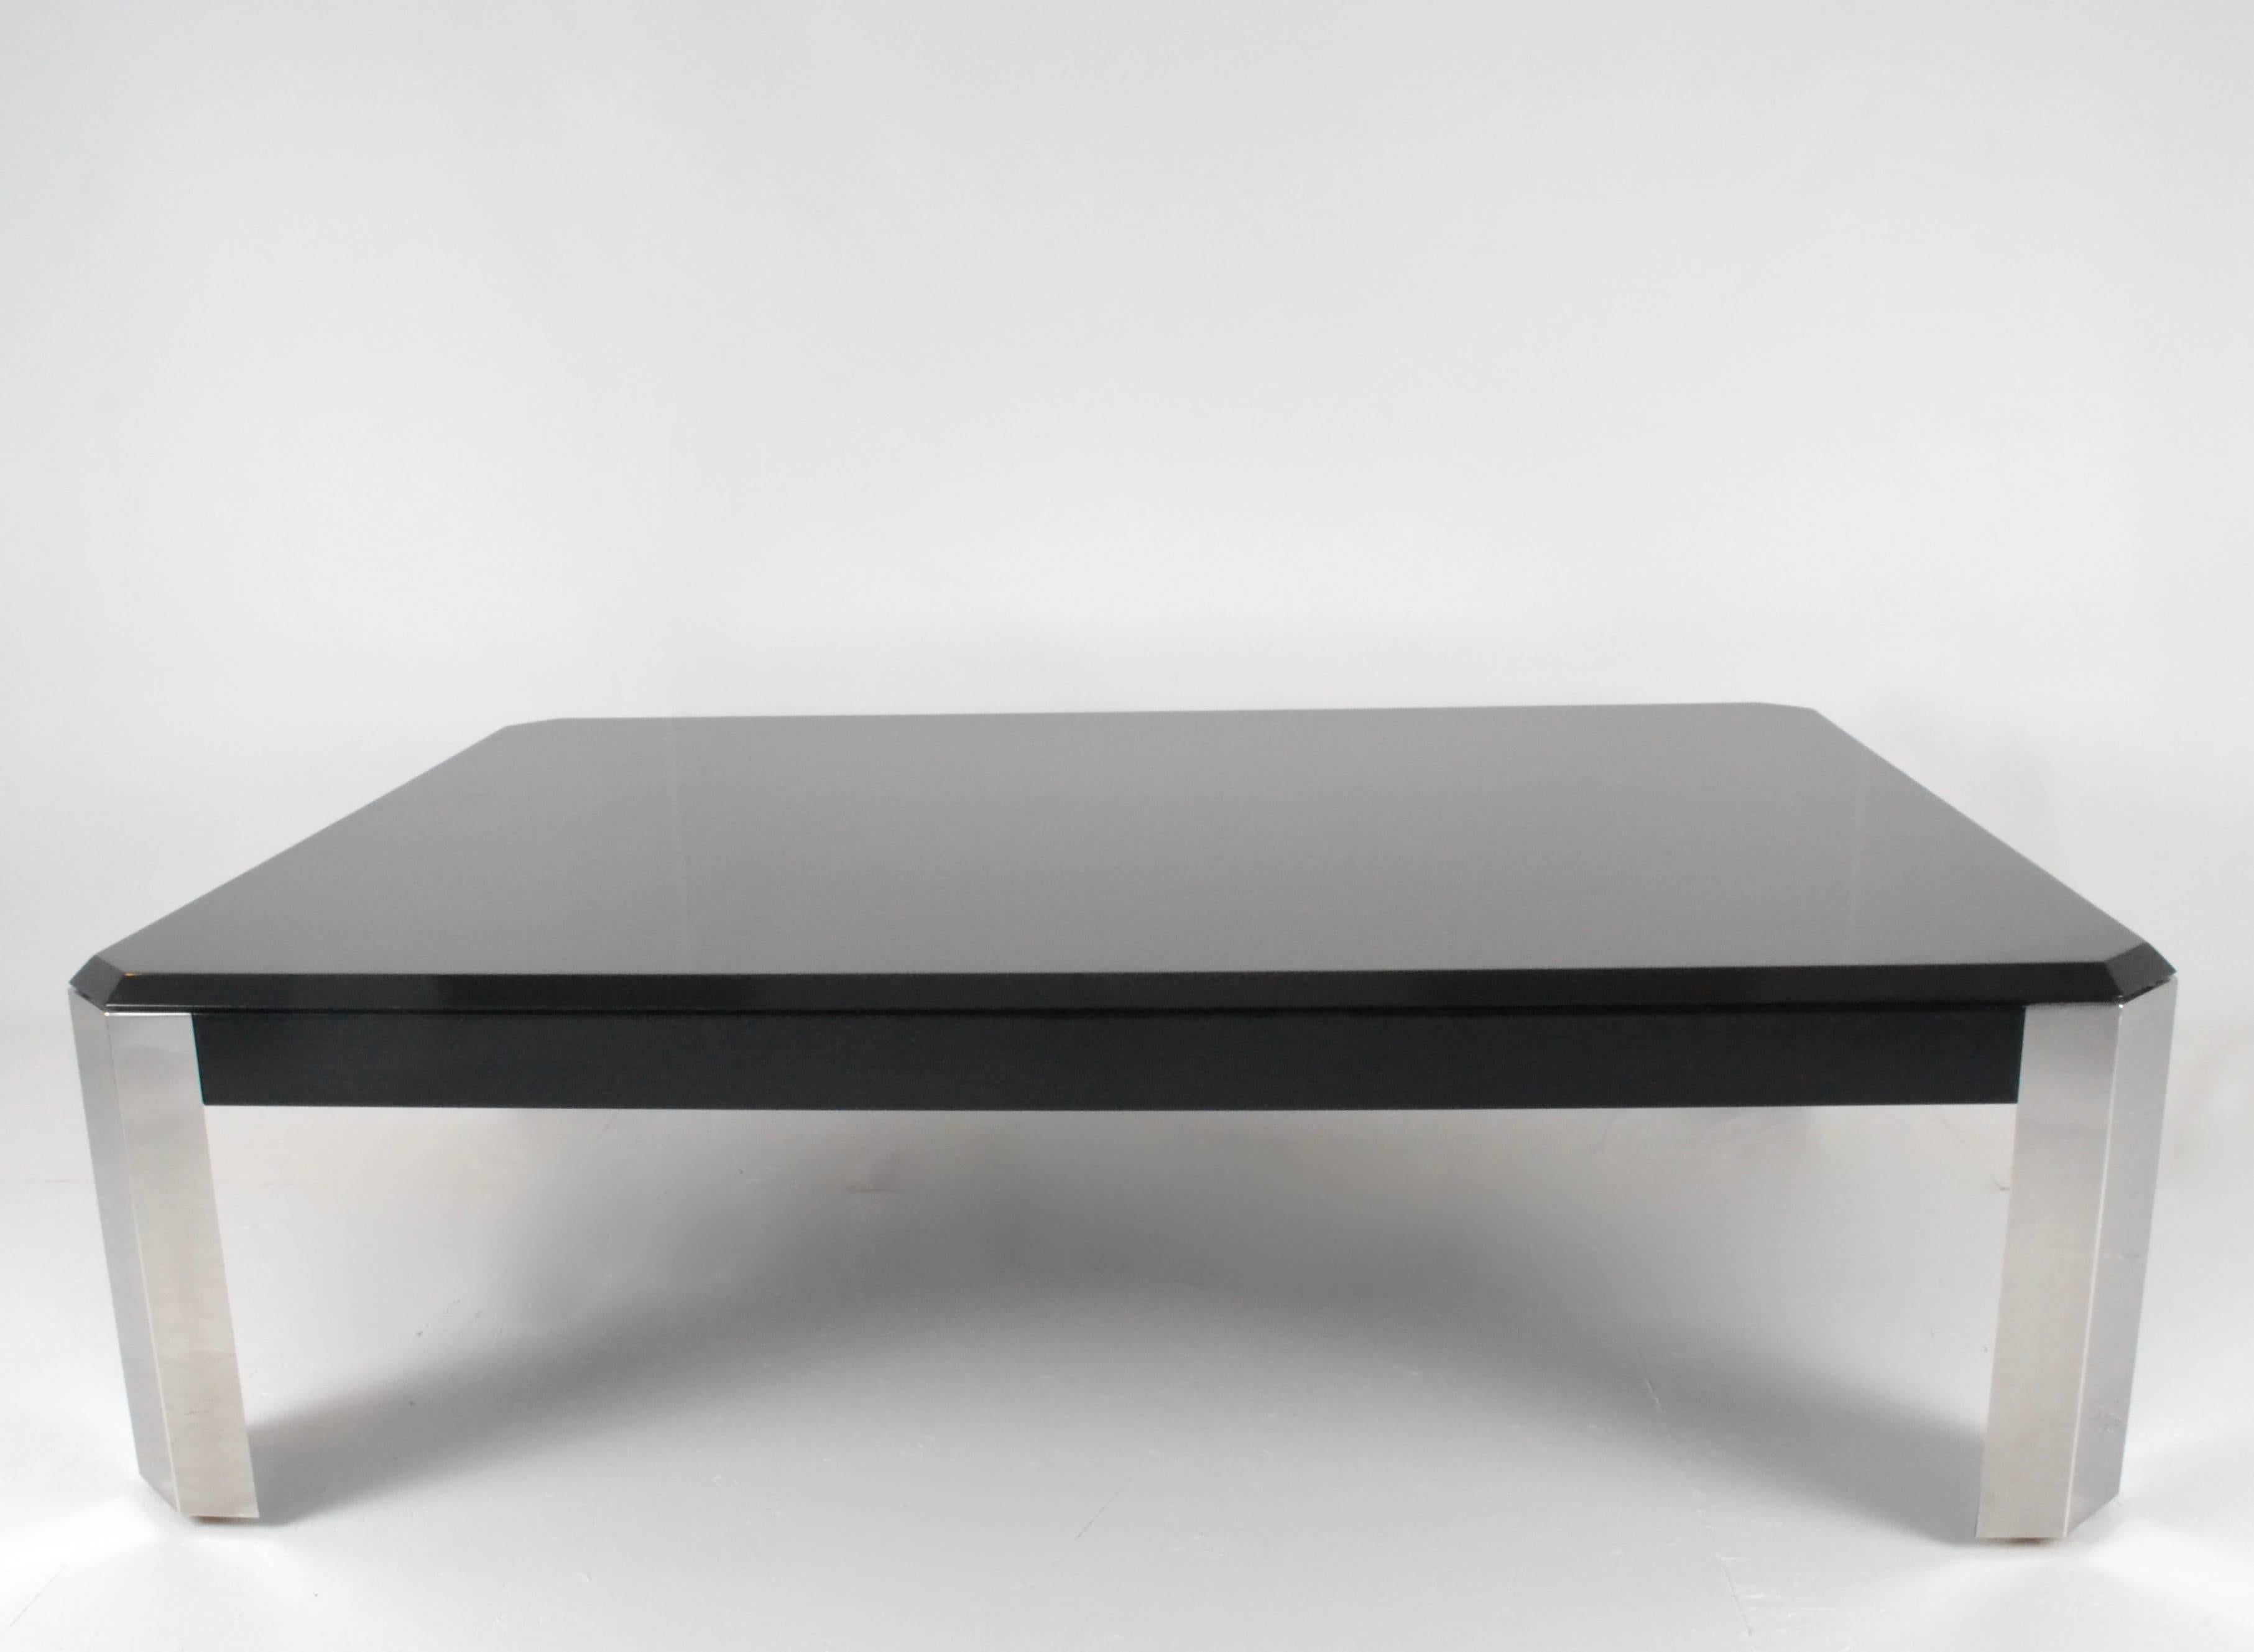 Great size and elegant presentation in high gloss black lacquer with polished steel legs. Newly lacquered. 